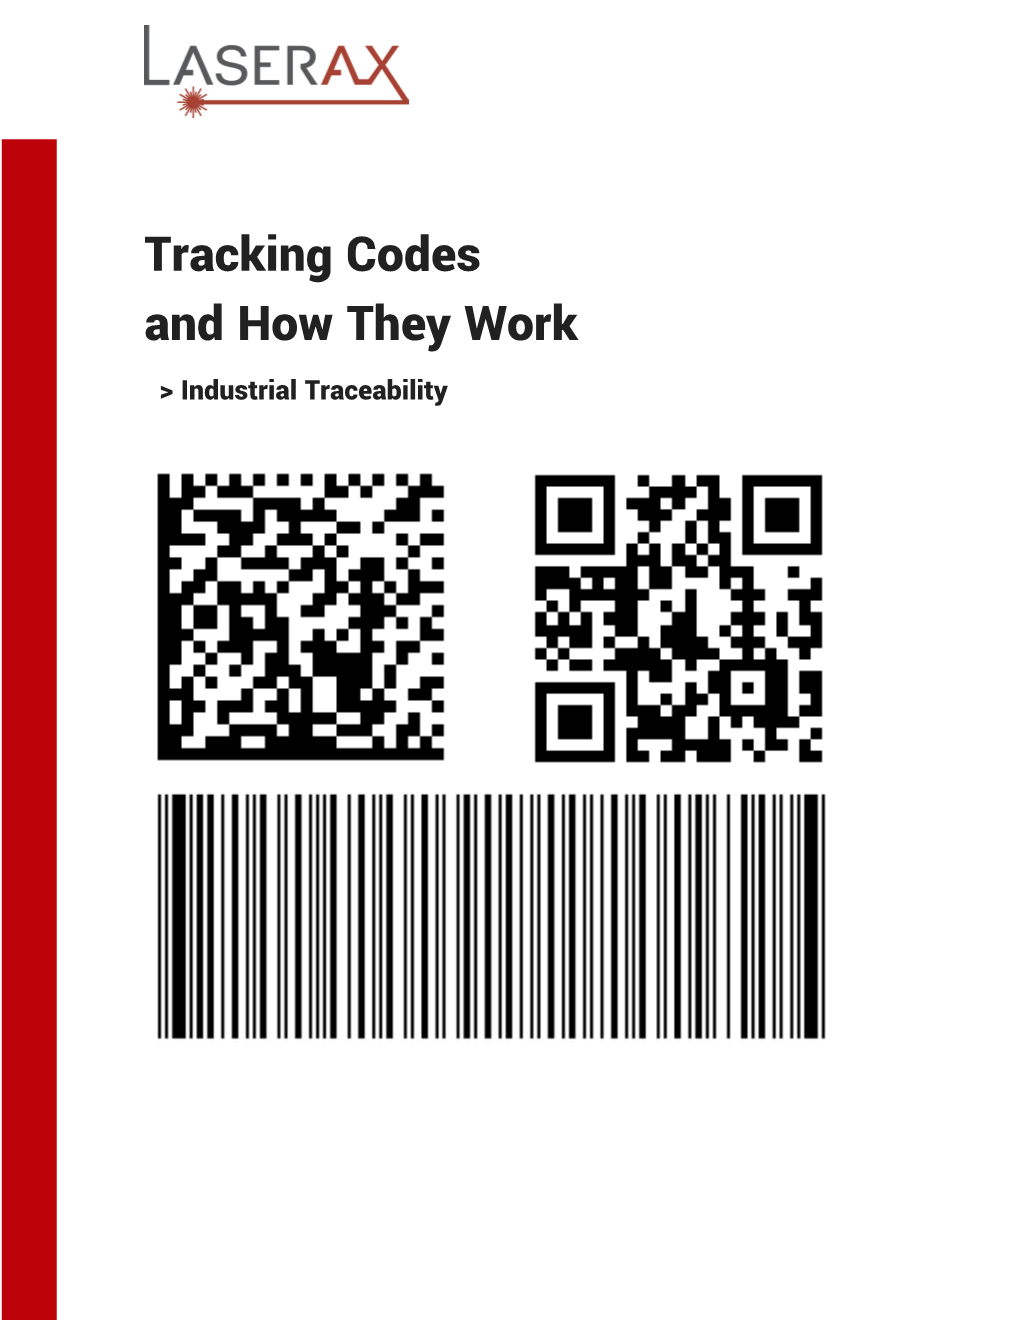 Tracking Codes and How They Work